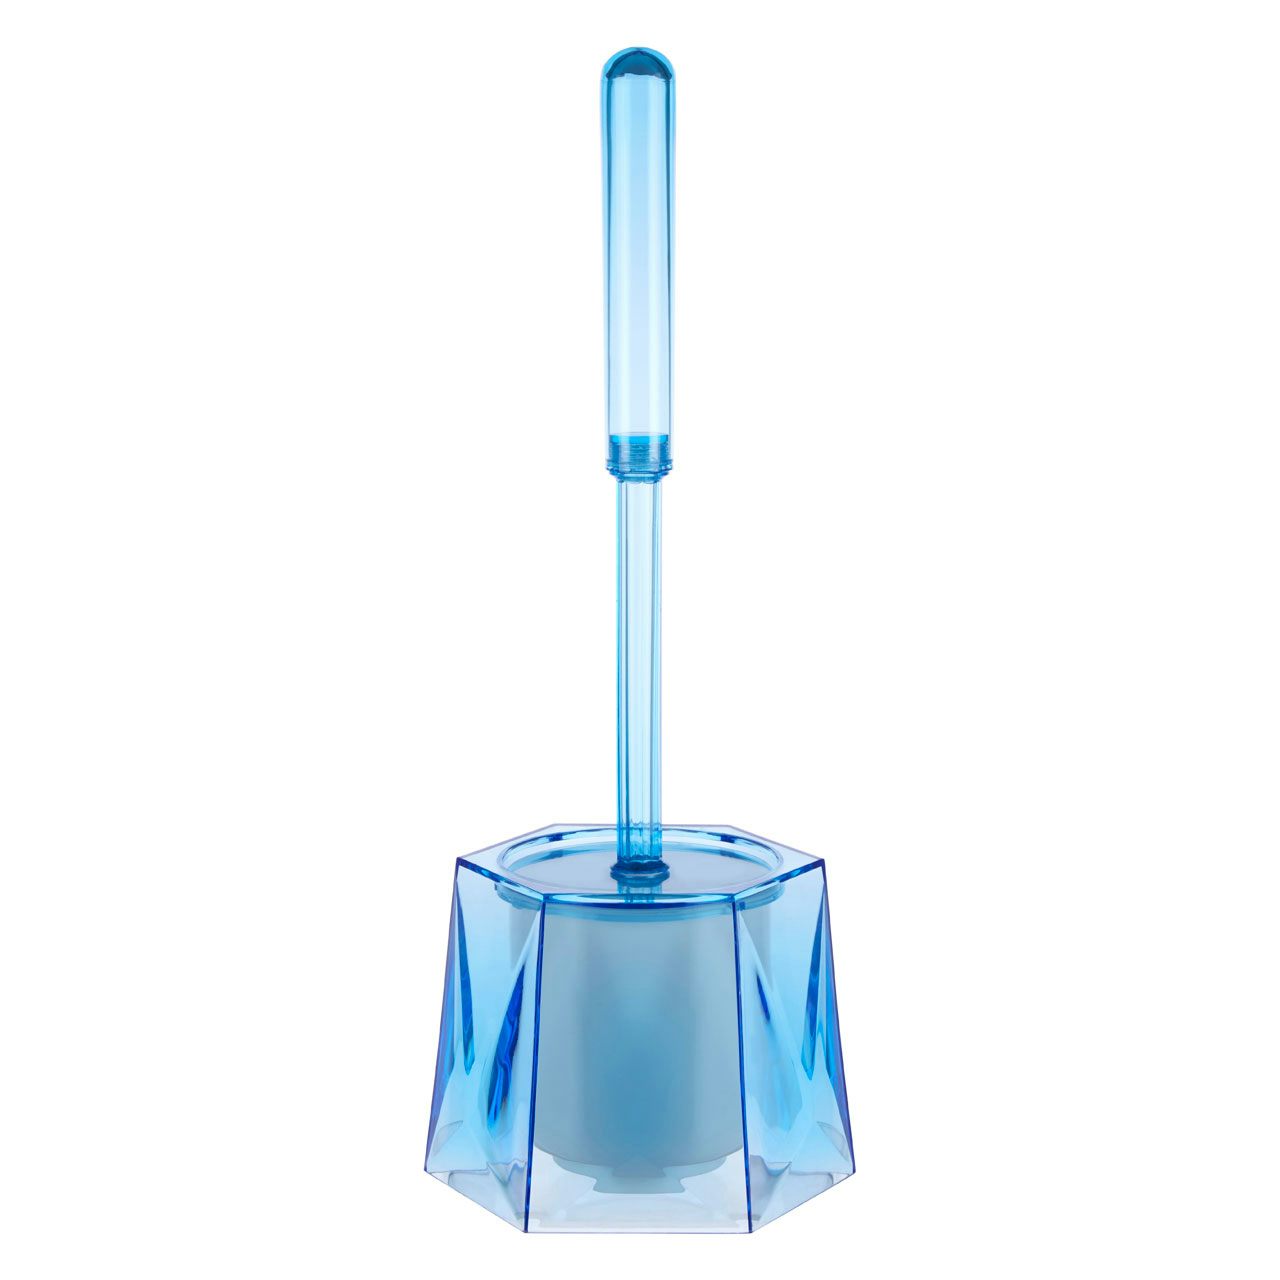 Accents Dow blue acrylic toilet brush and holder